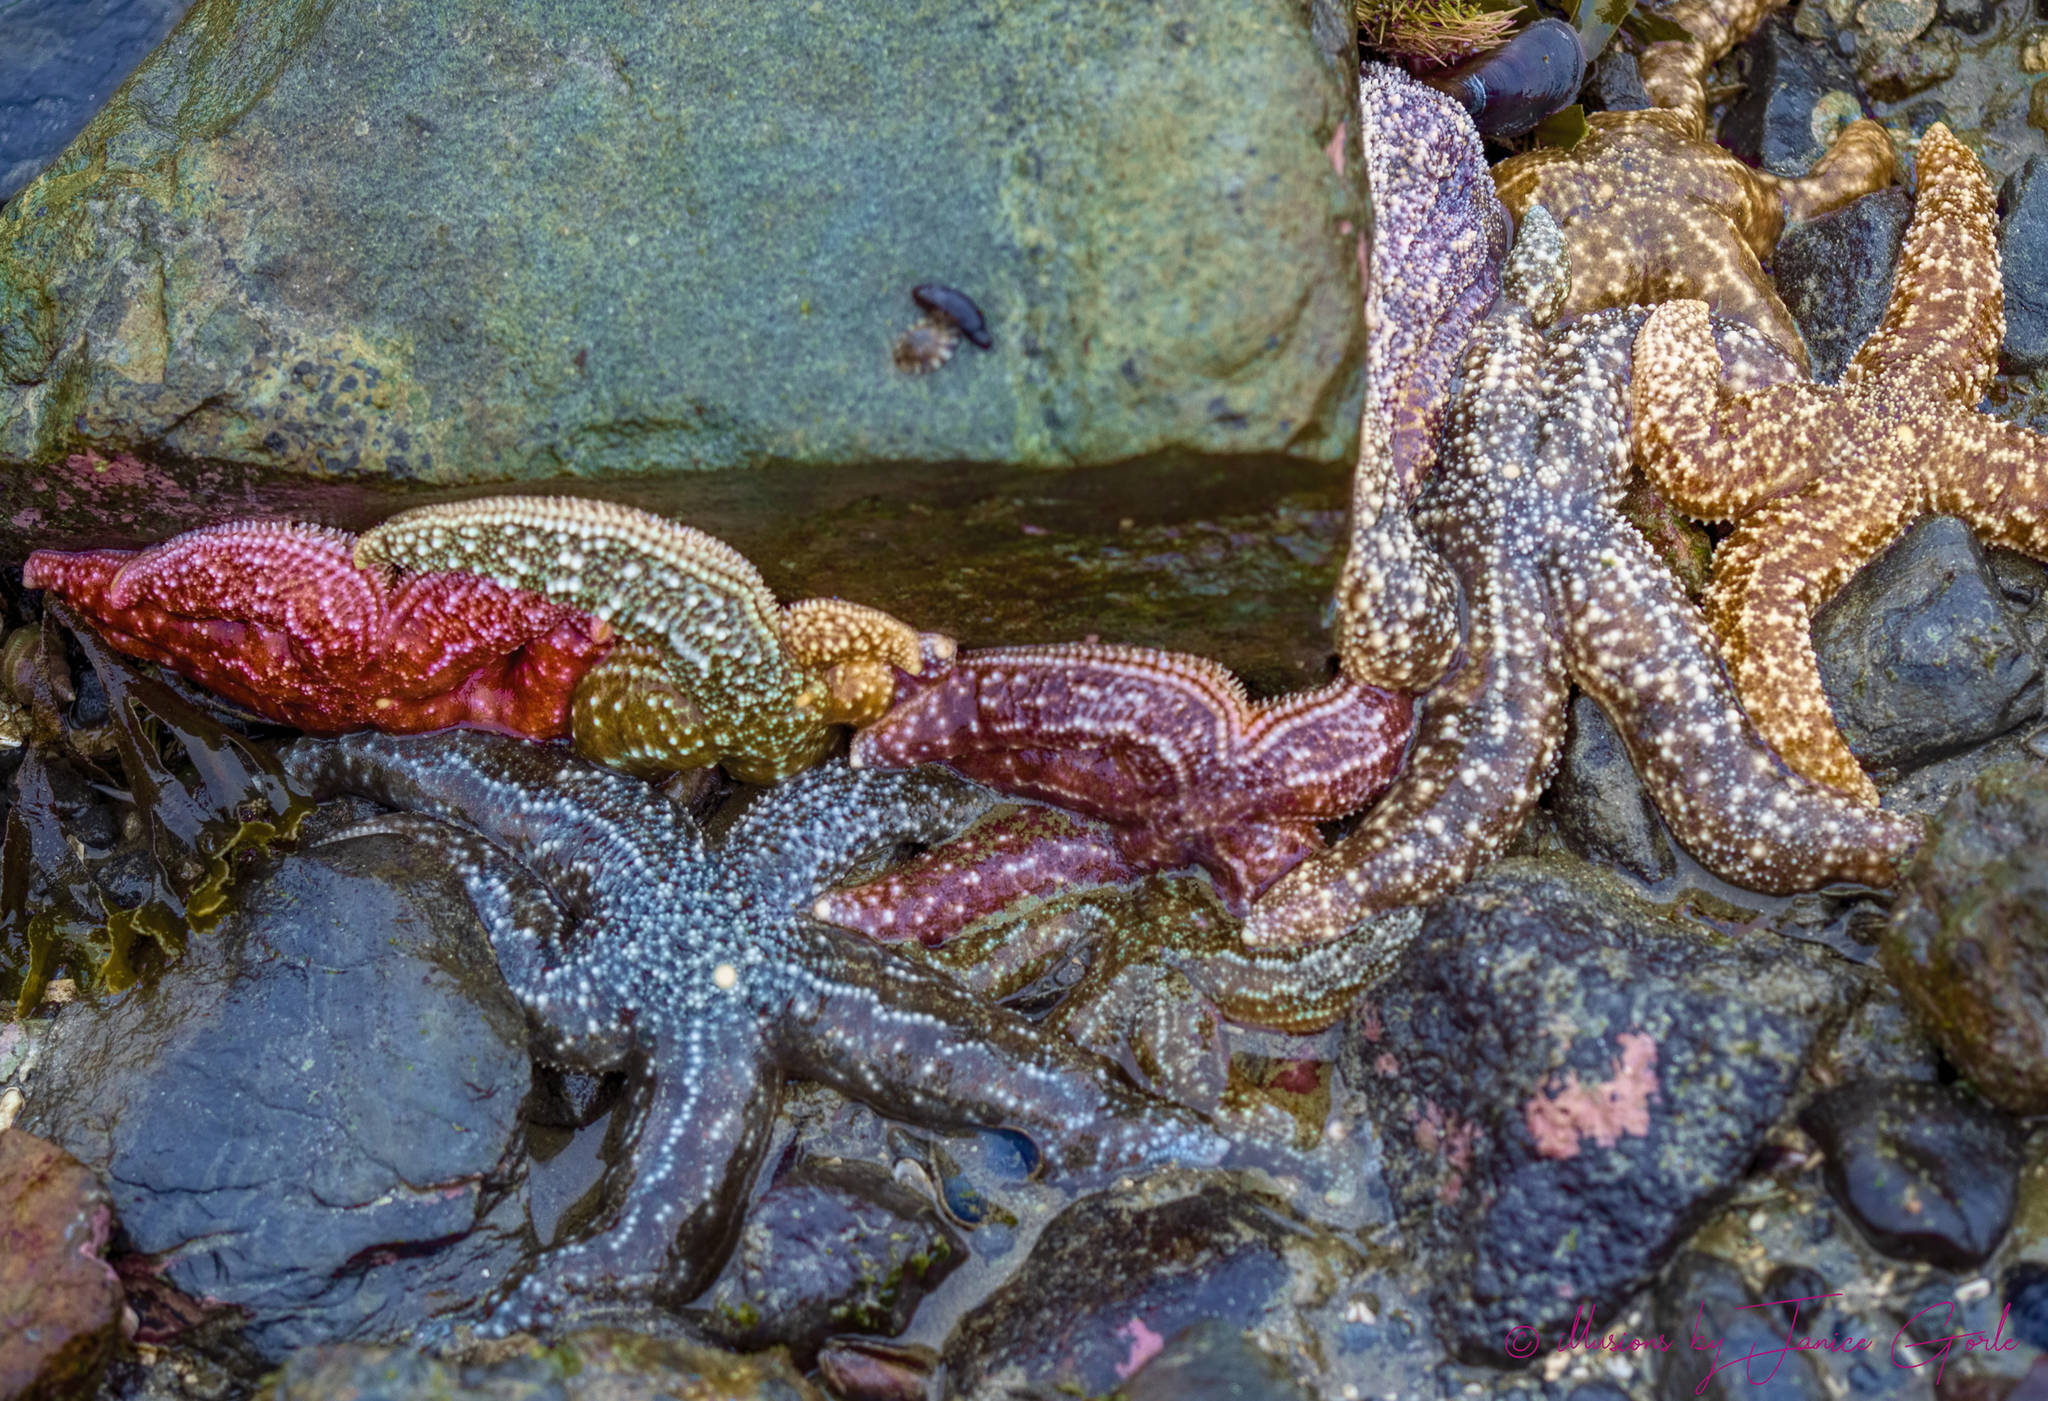 Colorful sea stars at low tide at Point Louisa on April 20, 2019. (Courtesy Photo | Janice Gorle)